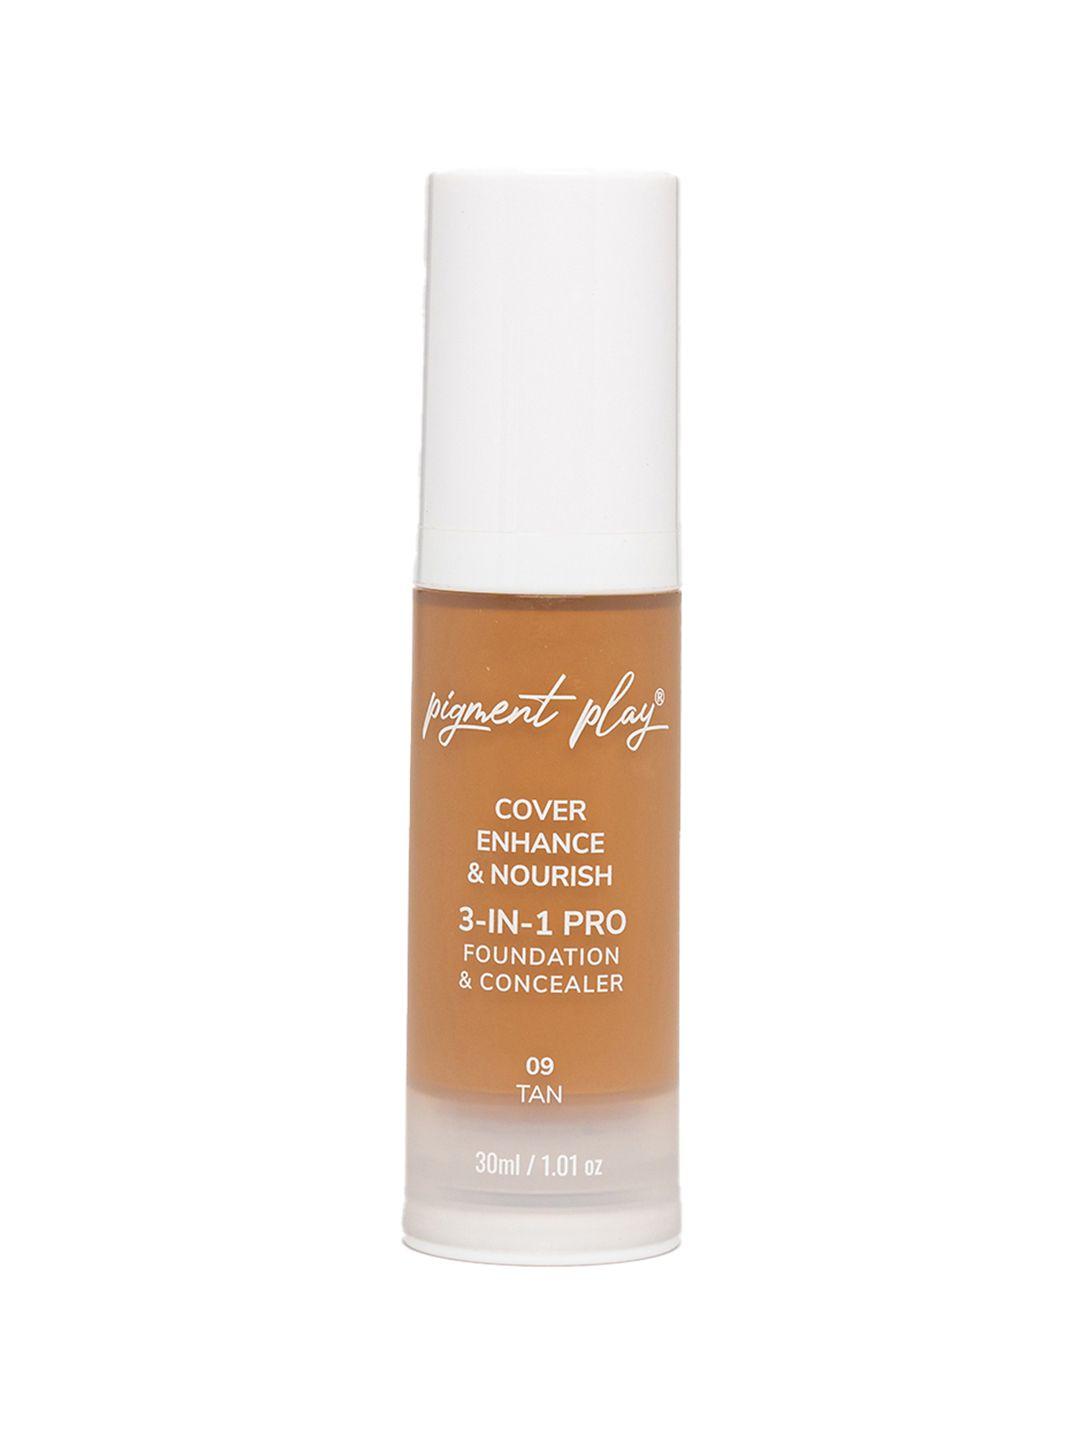 pigment play cover enhance & nourish 3-in-1 pro foundation & concealer 30ml - tan 09